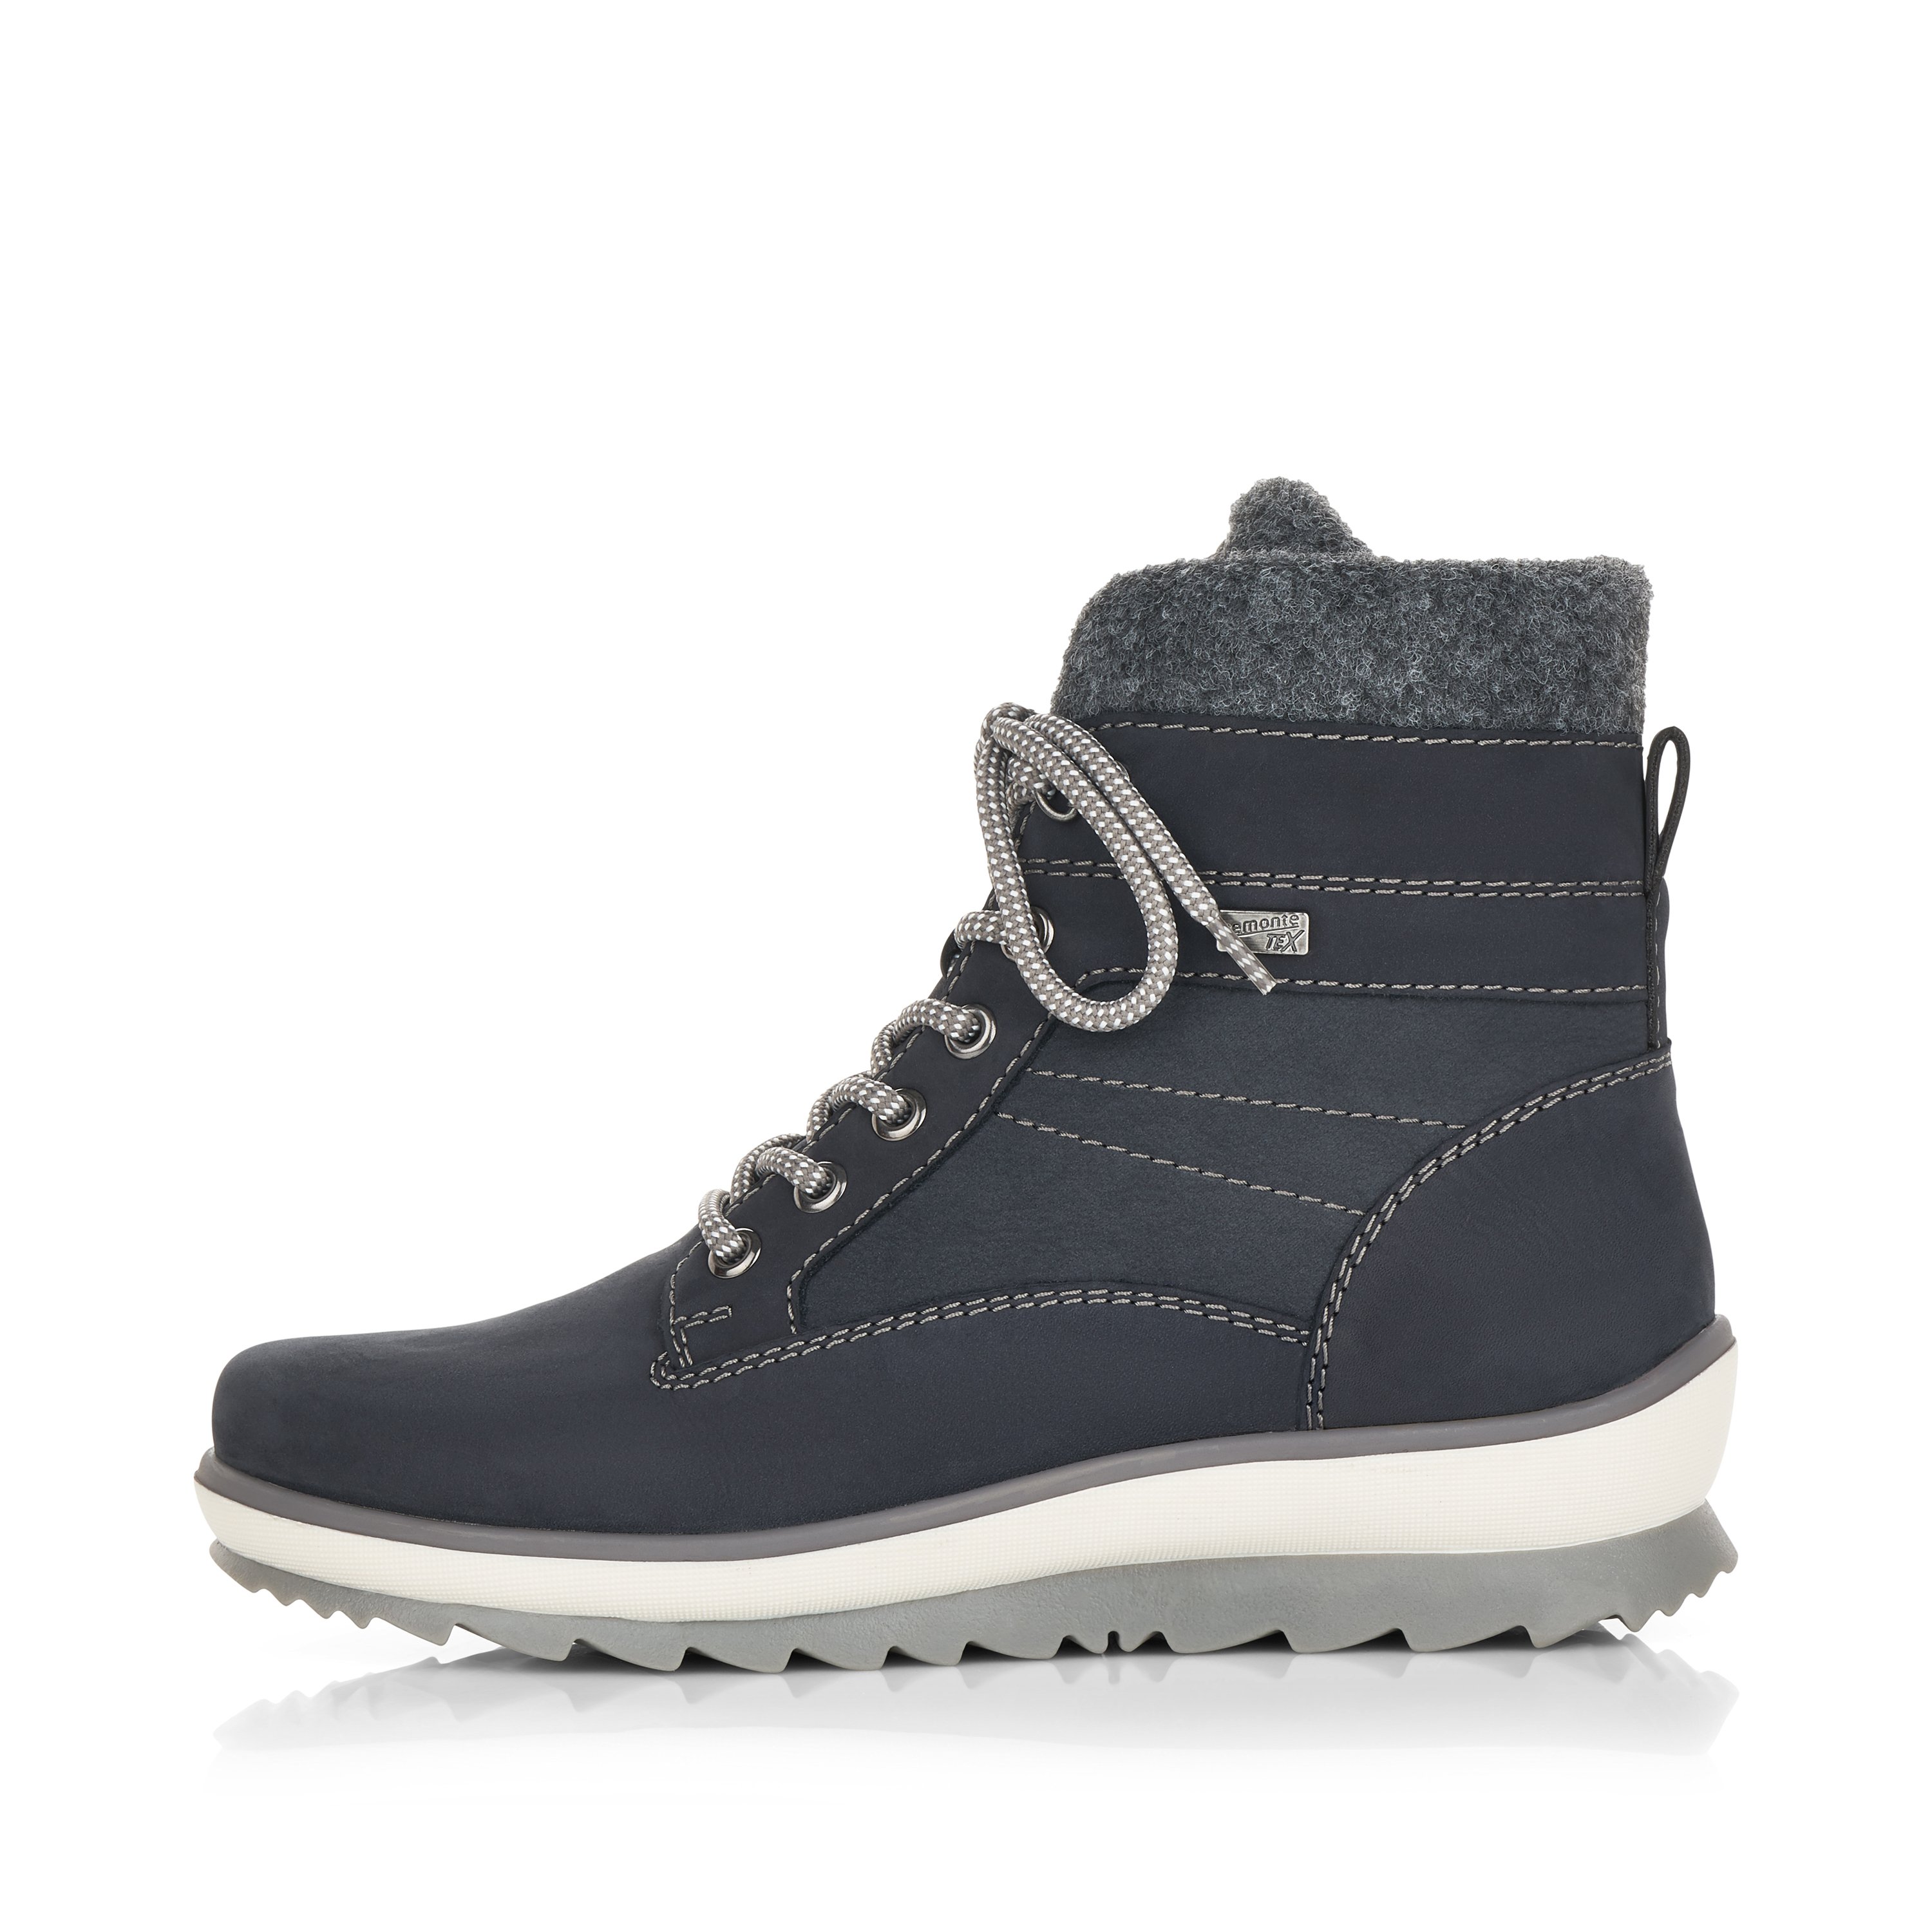 Dark blue remonte women´s lace-up boots R8477-14 with cushioning profile sole. The outside of the shoe